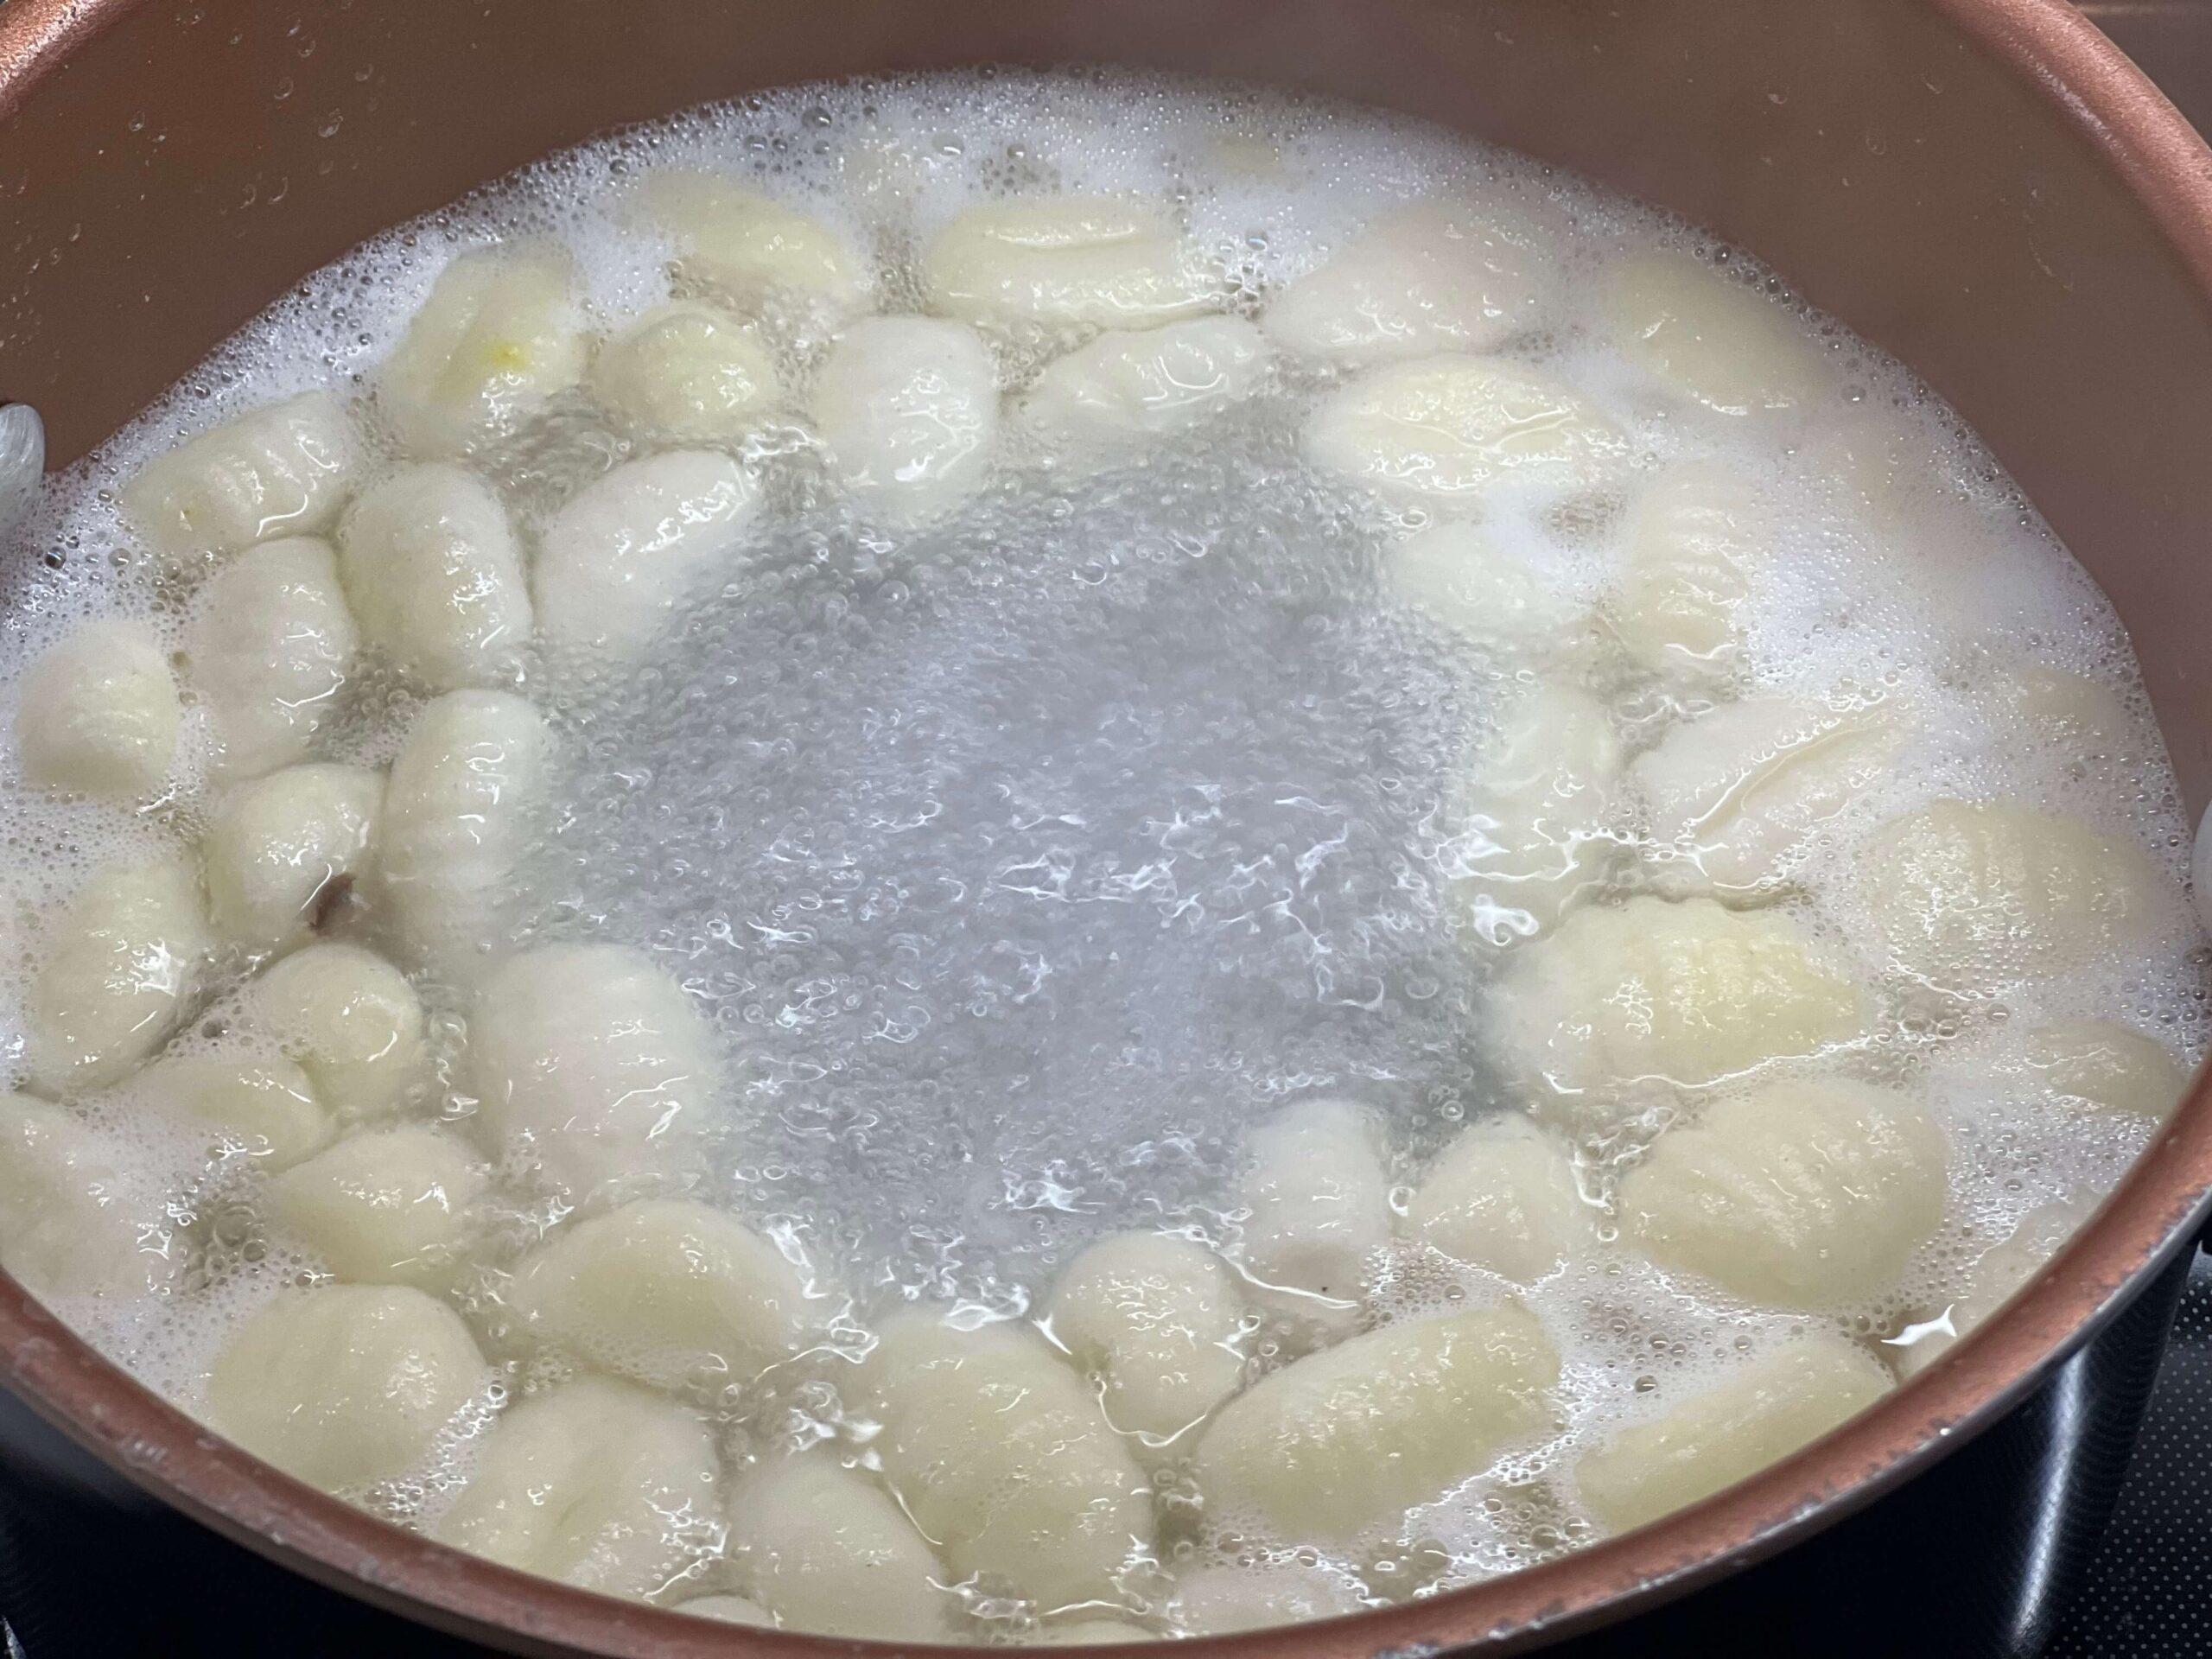 Cook gnocchi according to package directions.